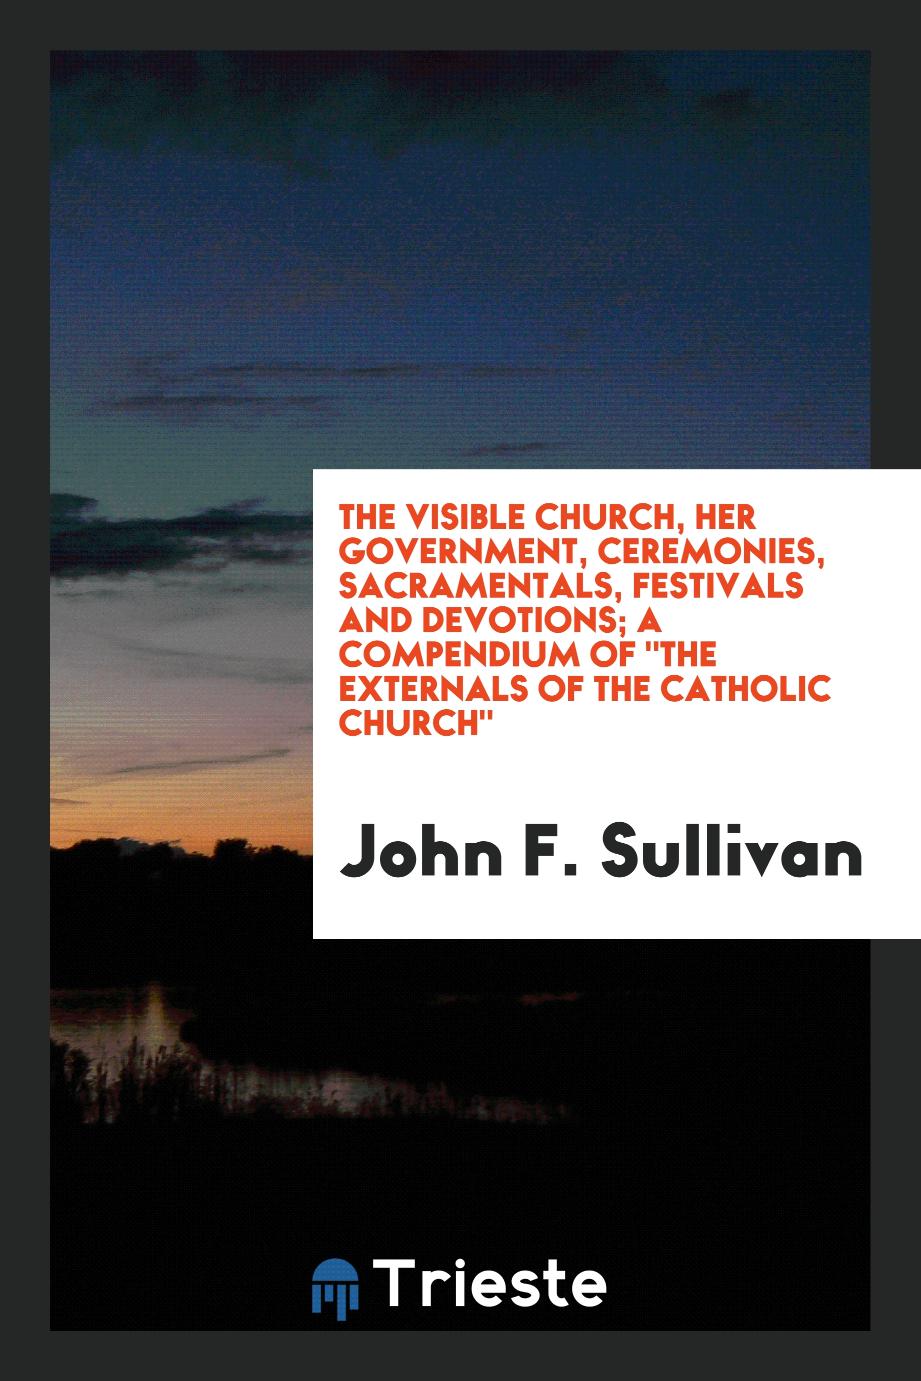 The visible church, her government, ceremonies, sacramentals, festivals and devotions; a compendium of "The externals of the Catholic church"